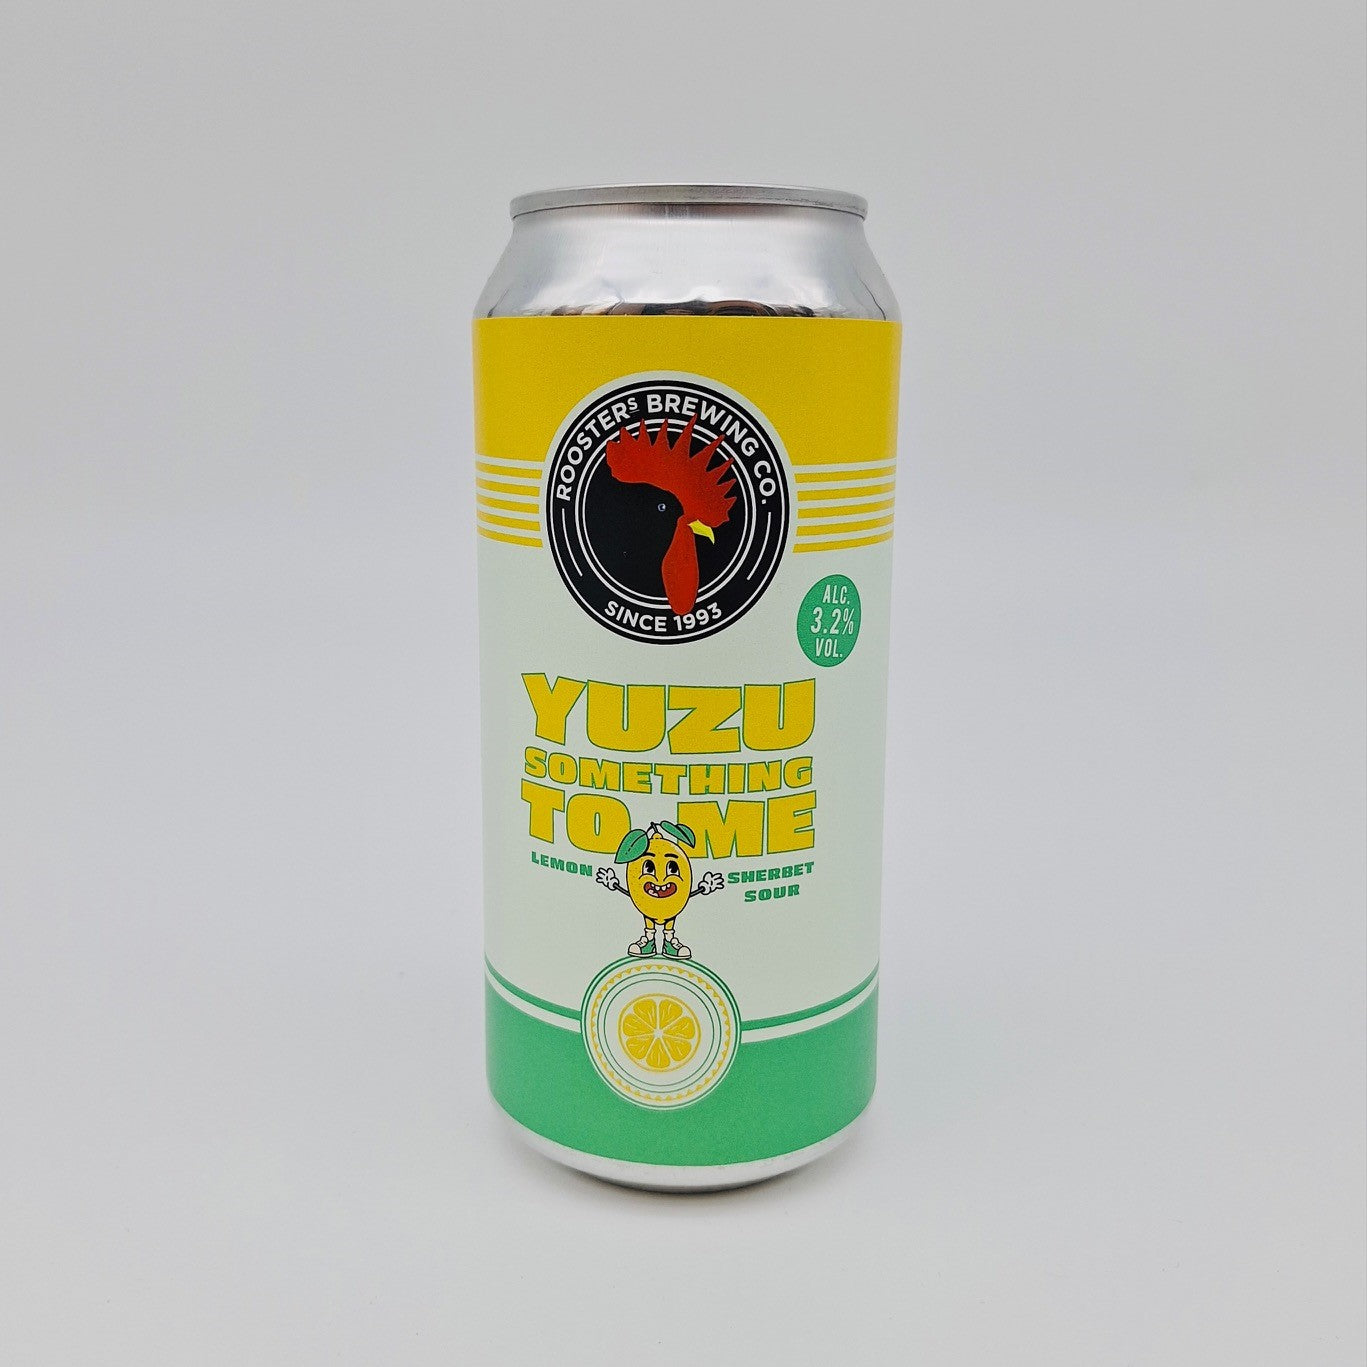 Roosters Yuzu Something To Me Sour 3.2% Can